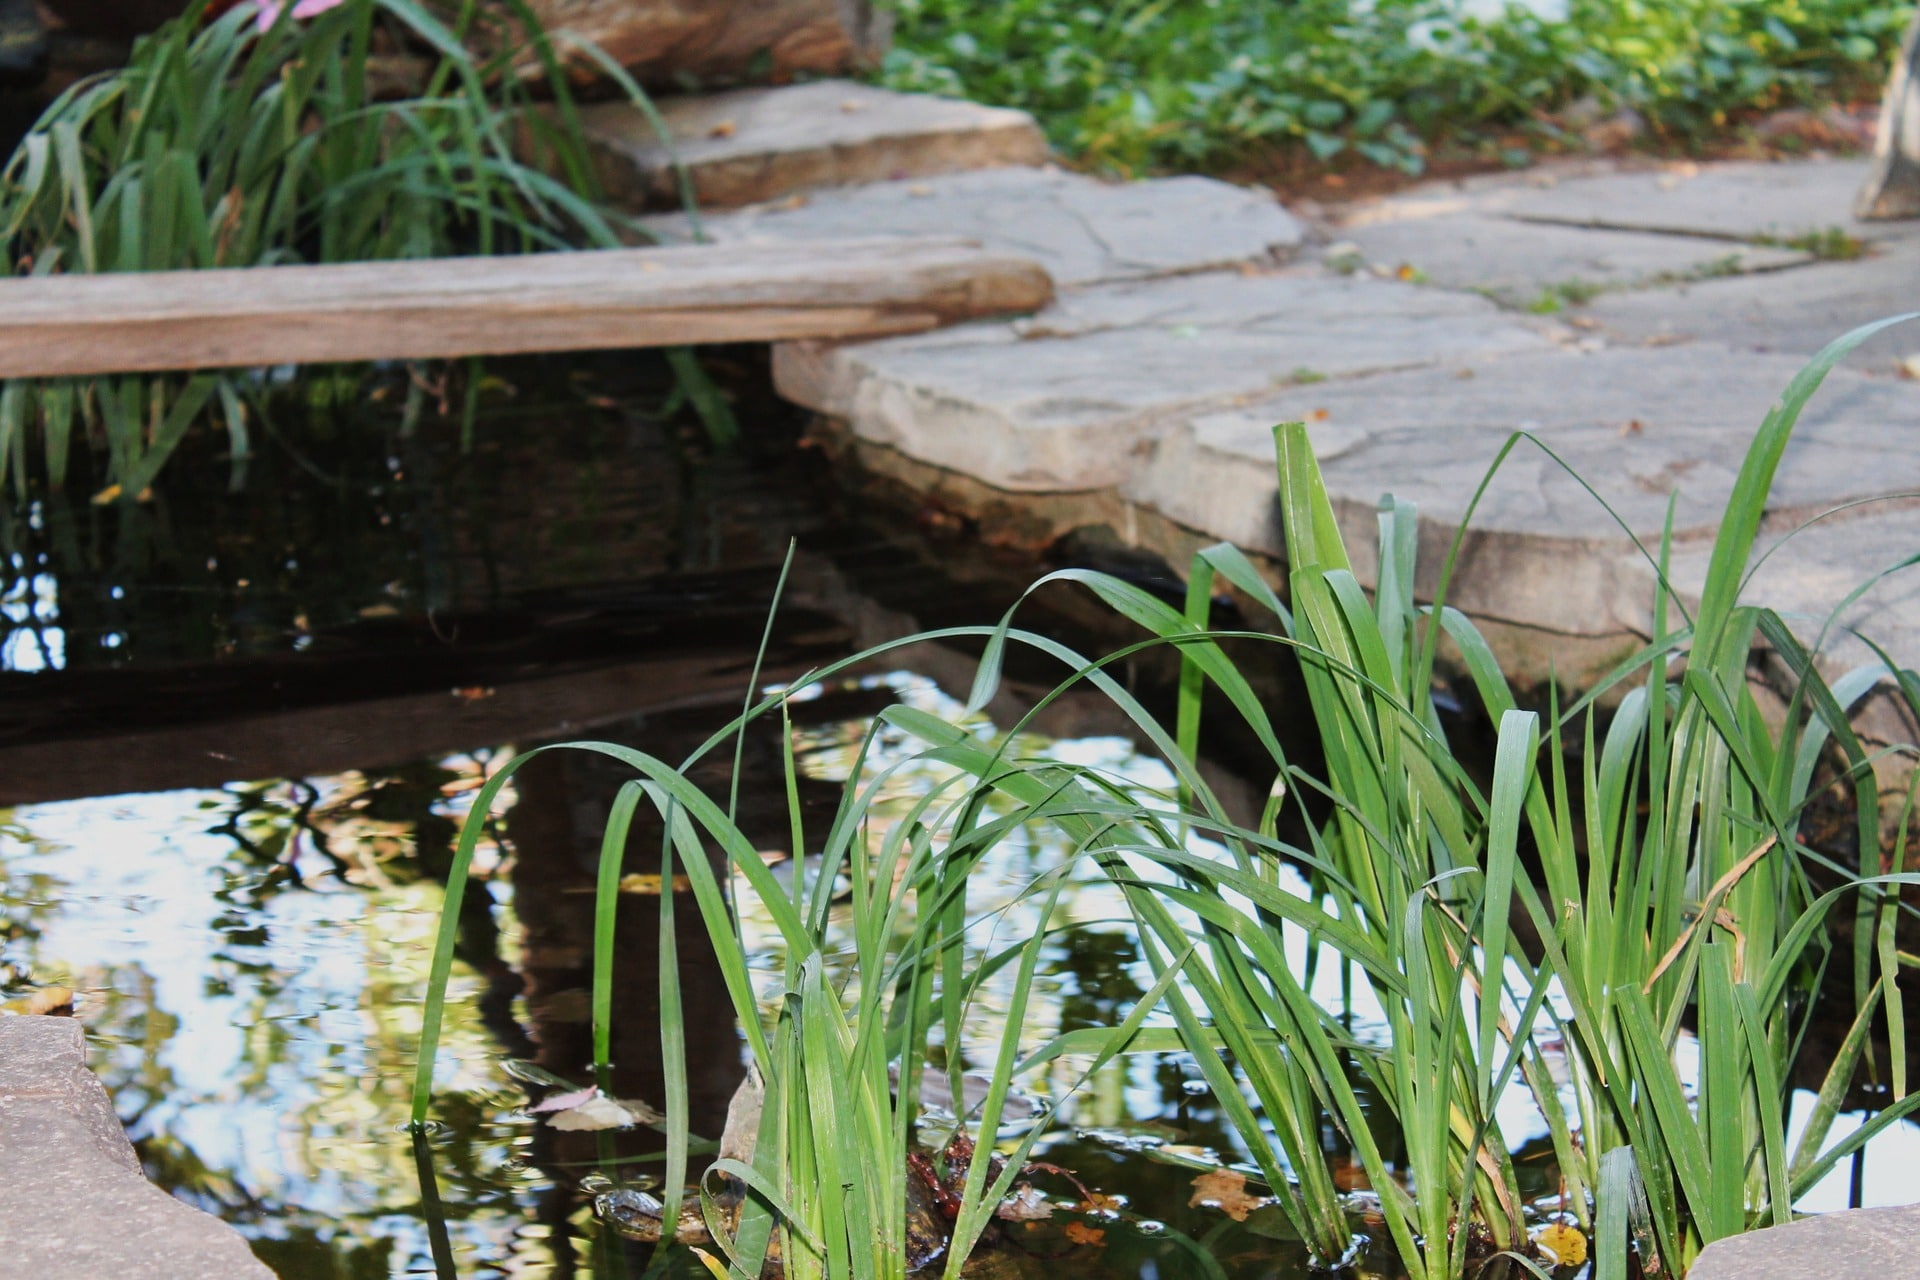 If you want to spruce up your outdoor living space, these 5 examples of beautiful water features are great options to choose from.